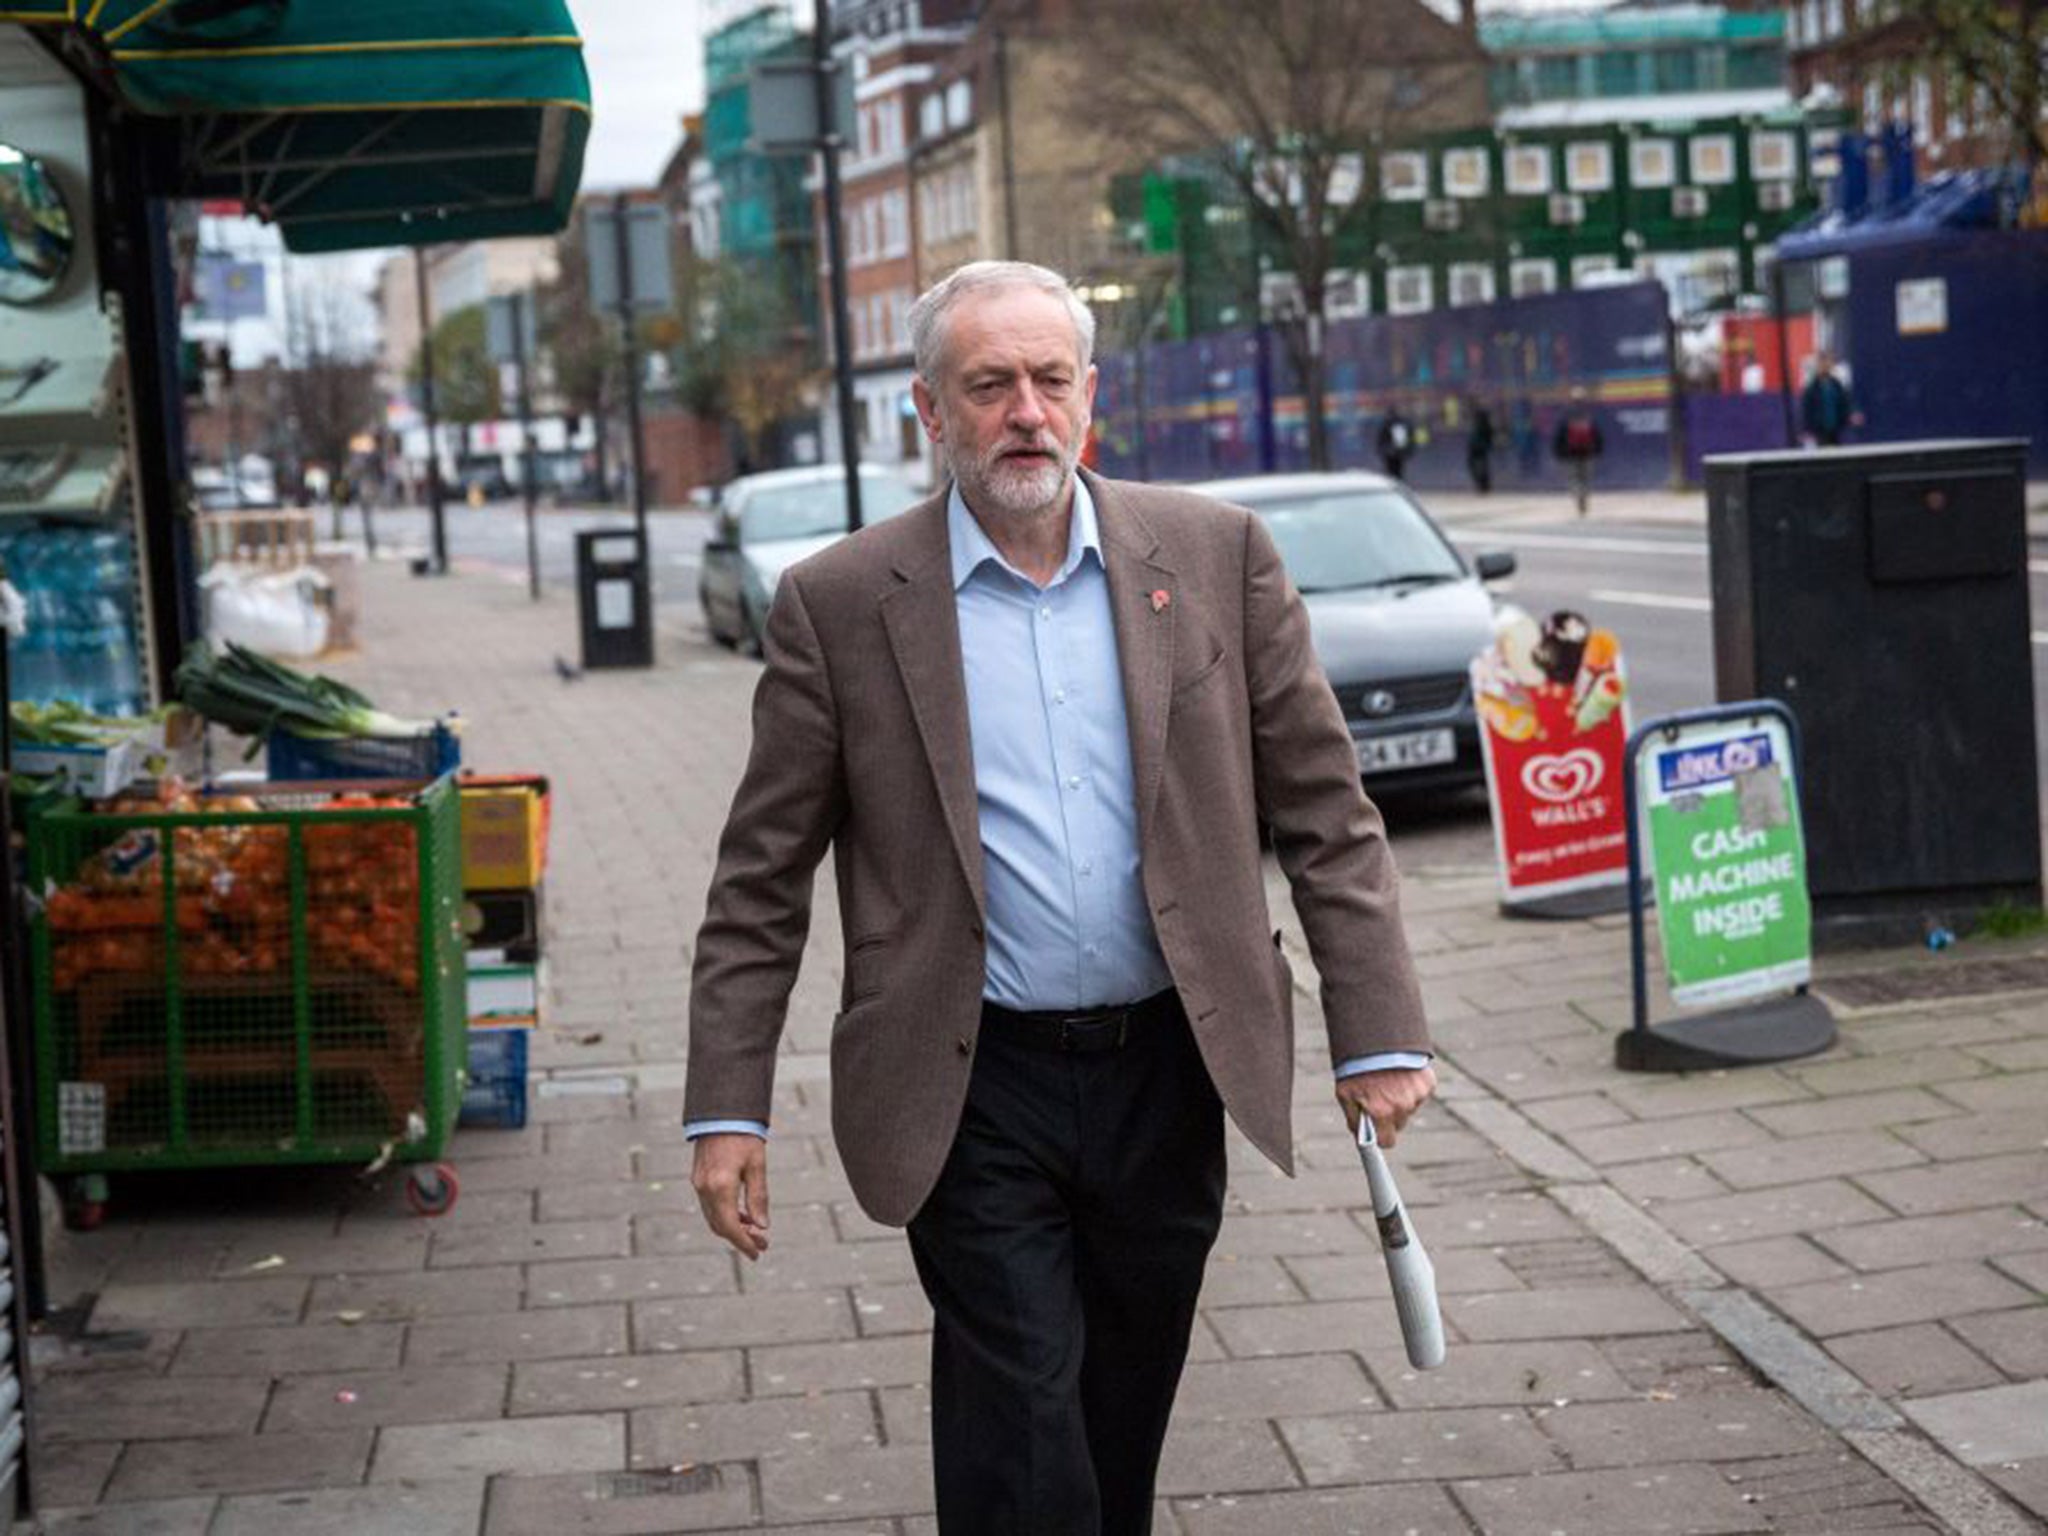 Jeremy Corbyn: finally getting the hang of life in the fast political lane